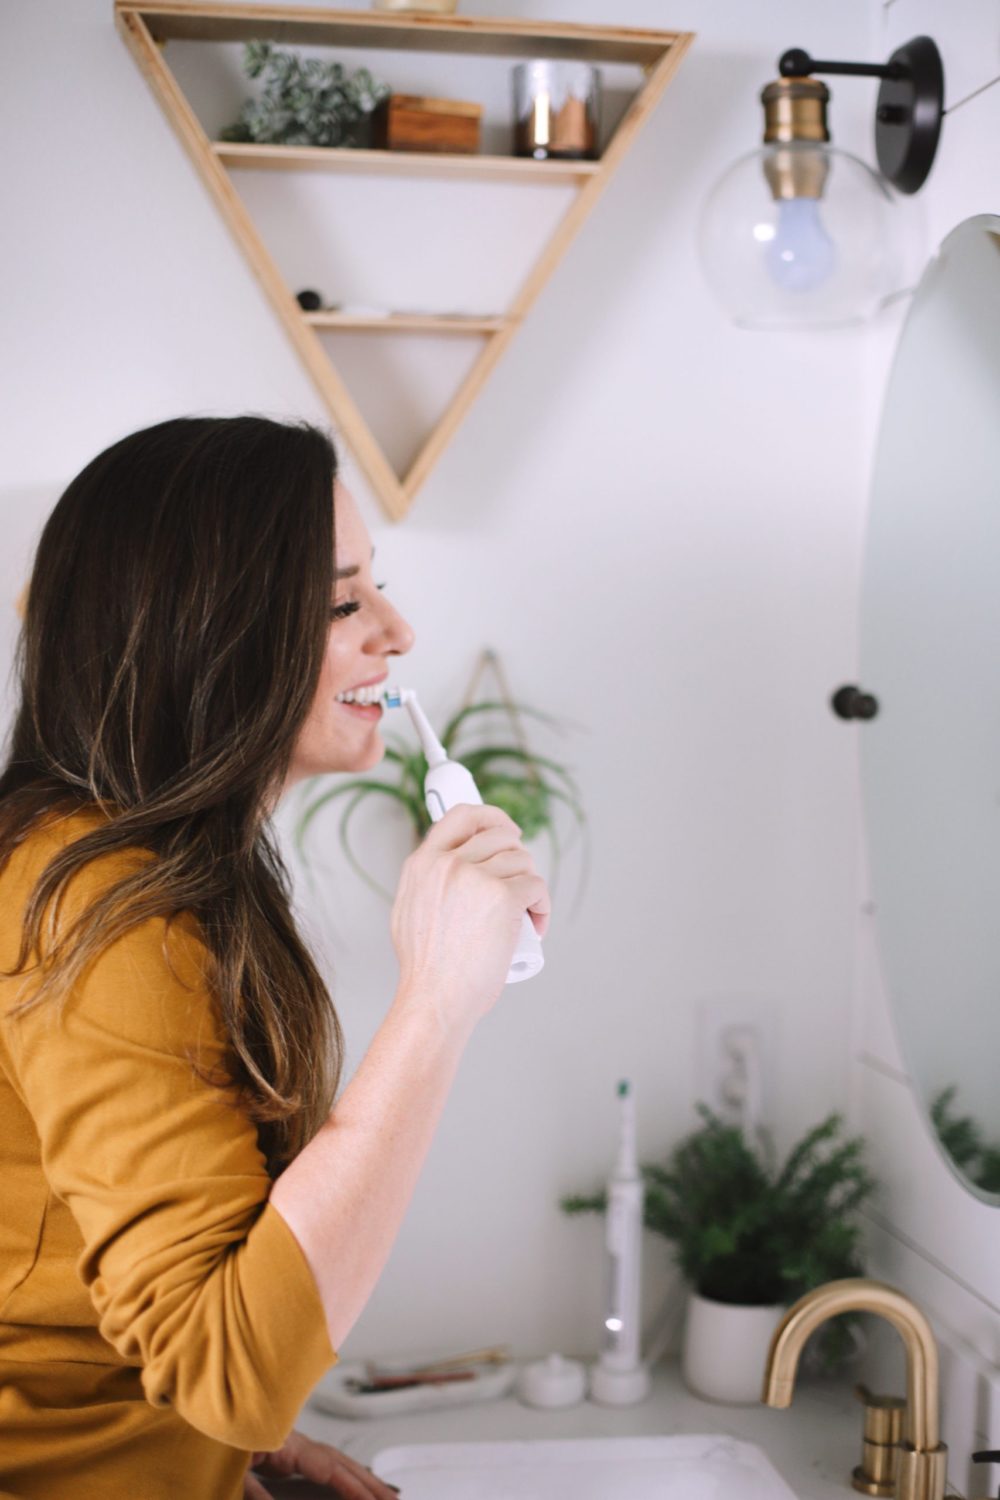 5 Things to Stop in 2020! Let's not hijacking our future by doing these 5 things in the present. It's time for a full, productive, successful year! | 5 Things to Stop Doing in 2020 + Quotes to Inspire Your Year by popular Florida life and style blog: image of a woman brushing her teeth.